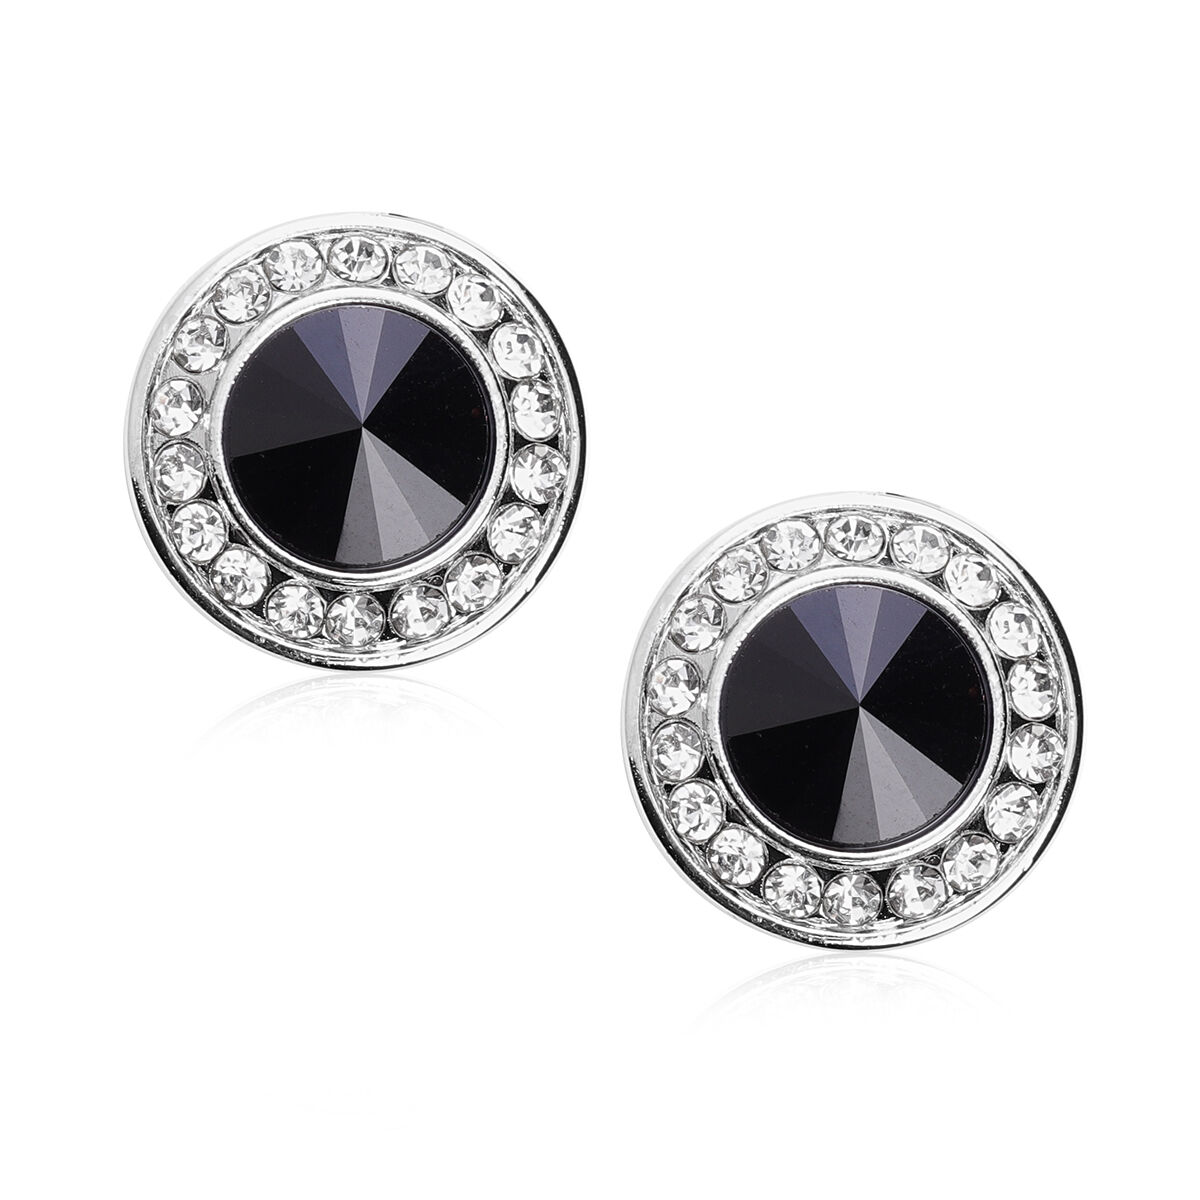 Simulated Black Spinel and White Austrian Crystal Cuff Button Cover in Silver Tone